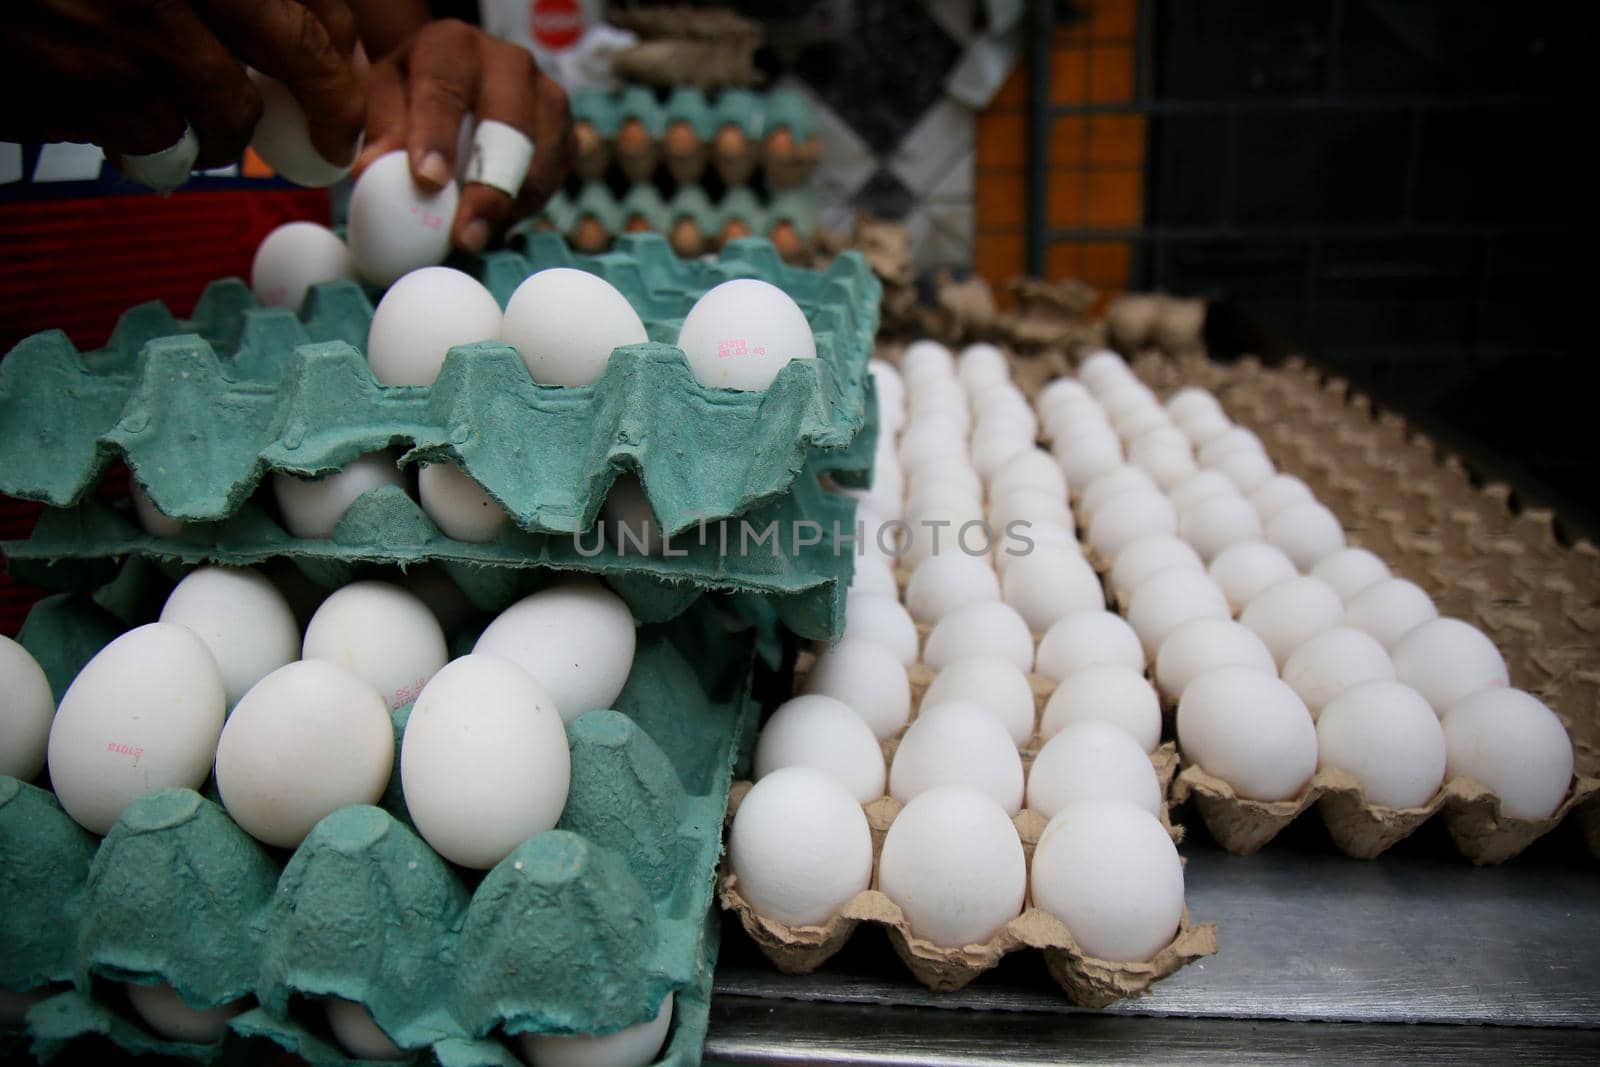 salvador, bahia, brazil - january 27, 2021: chicken eggs are seen for sale at the fair in japan, in the Liberdade neighborhood in the city of Salvador.